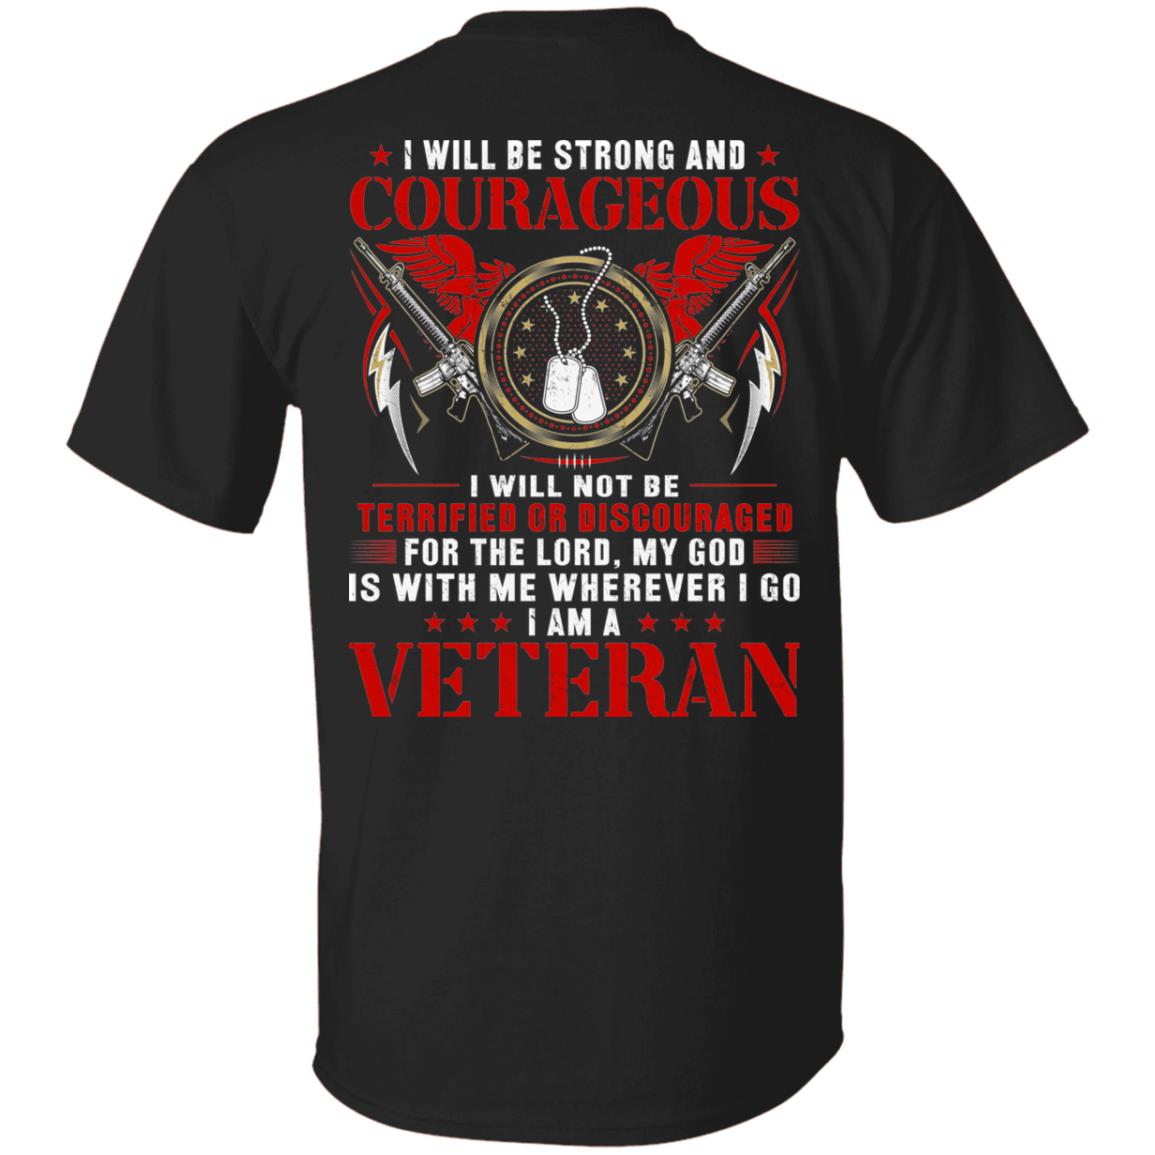 I will be strong and courageous t-shirt I am a Veteran Shirt